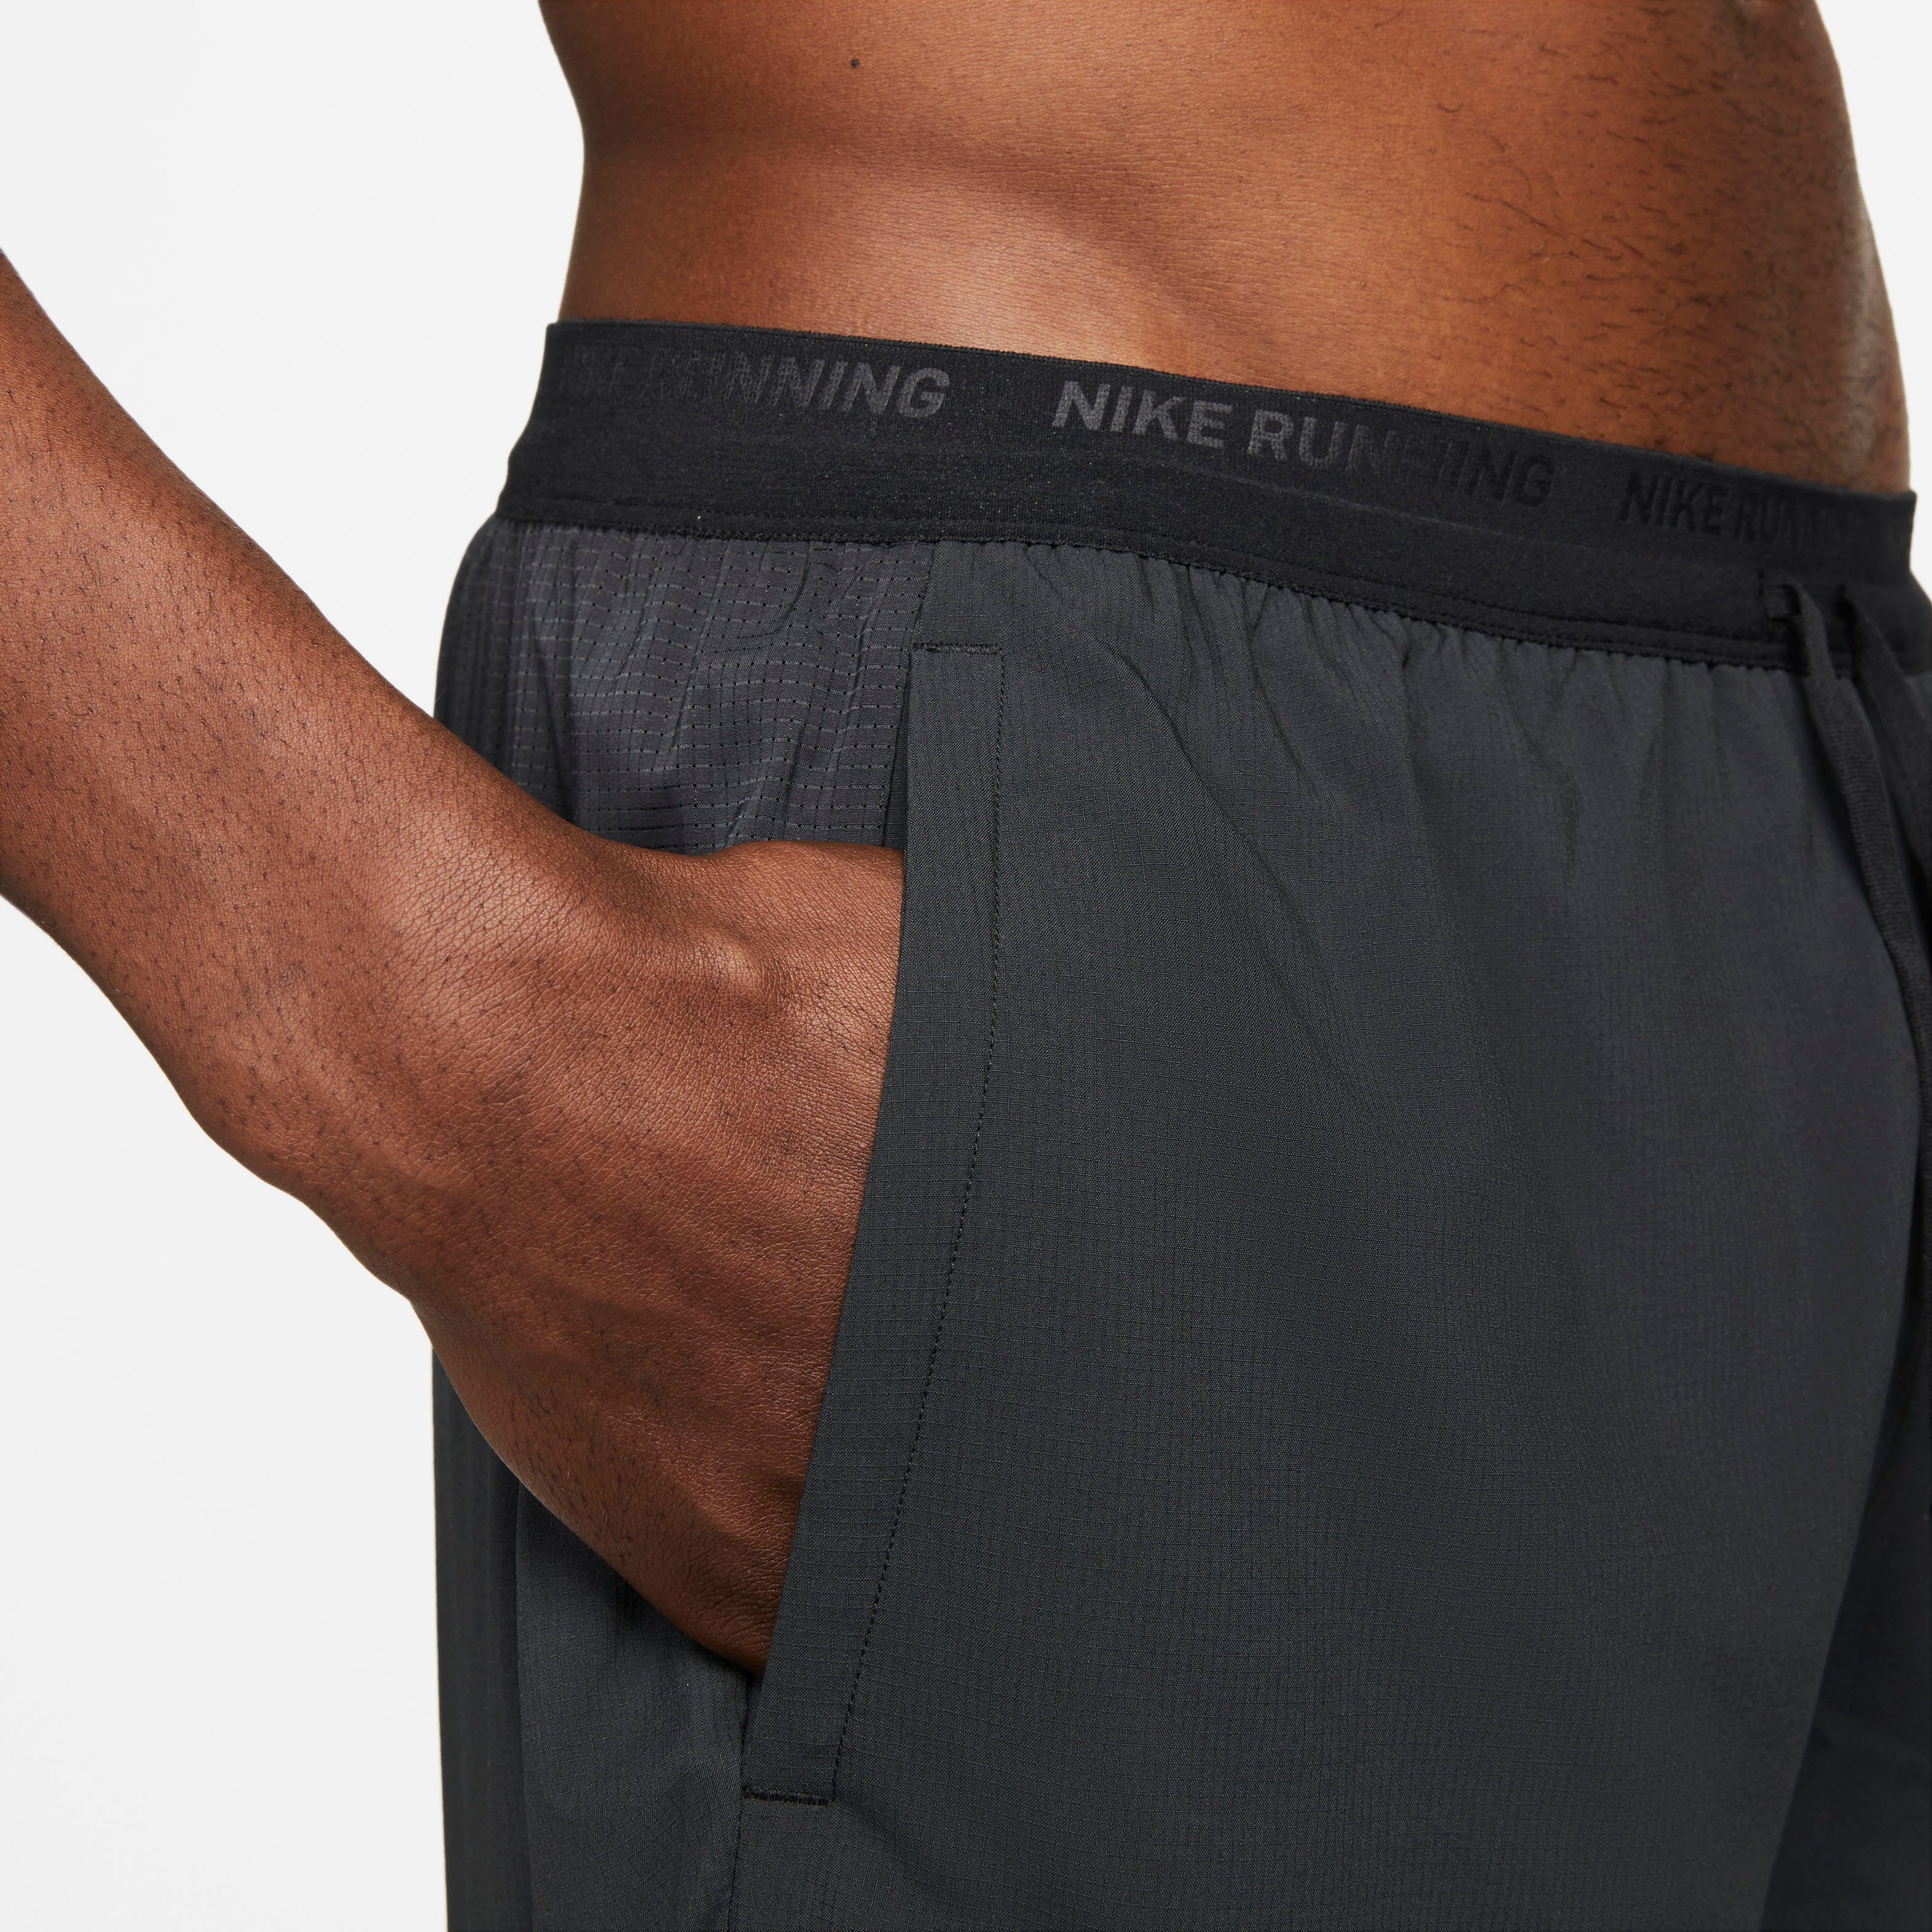 Nike " Stride Laufshorts Running Brief-Lined Dri-FIT Shorts Men's